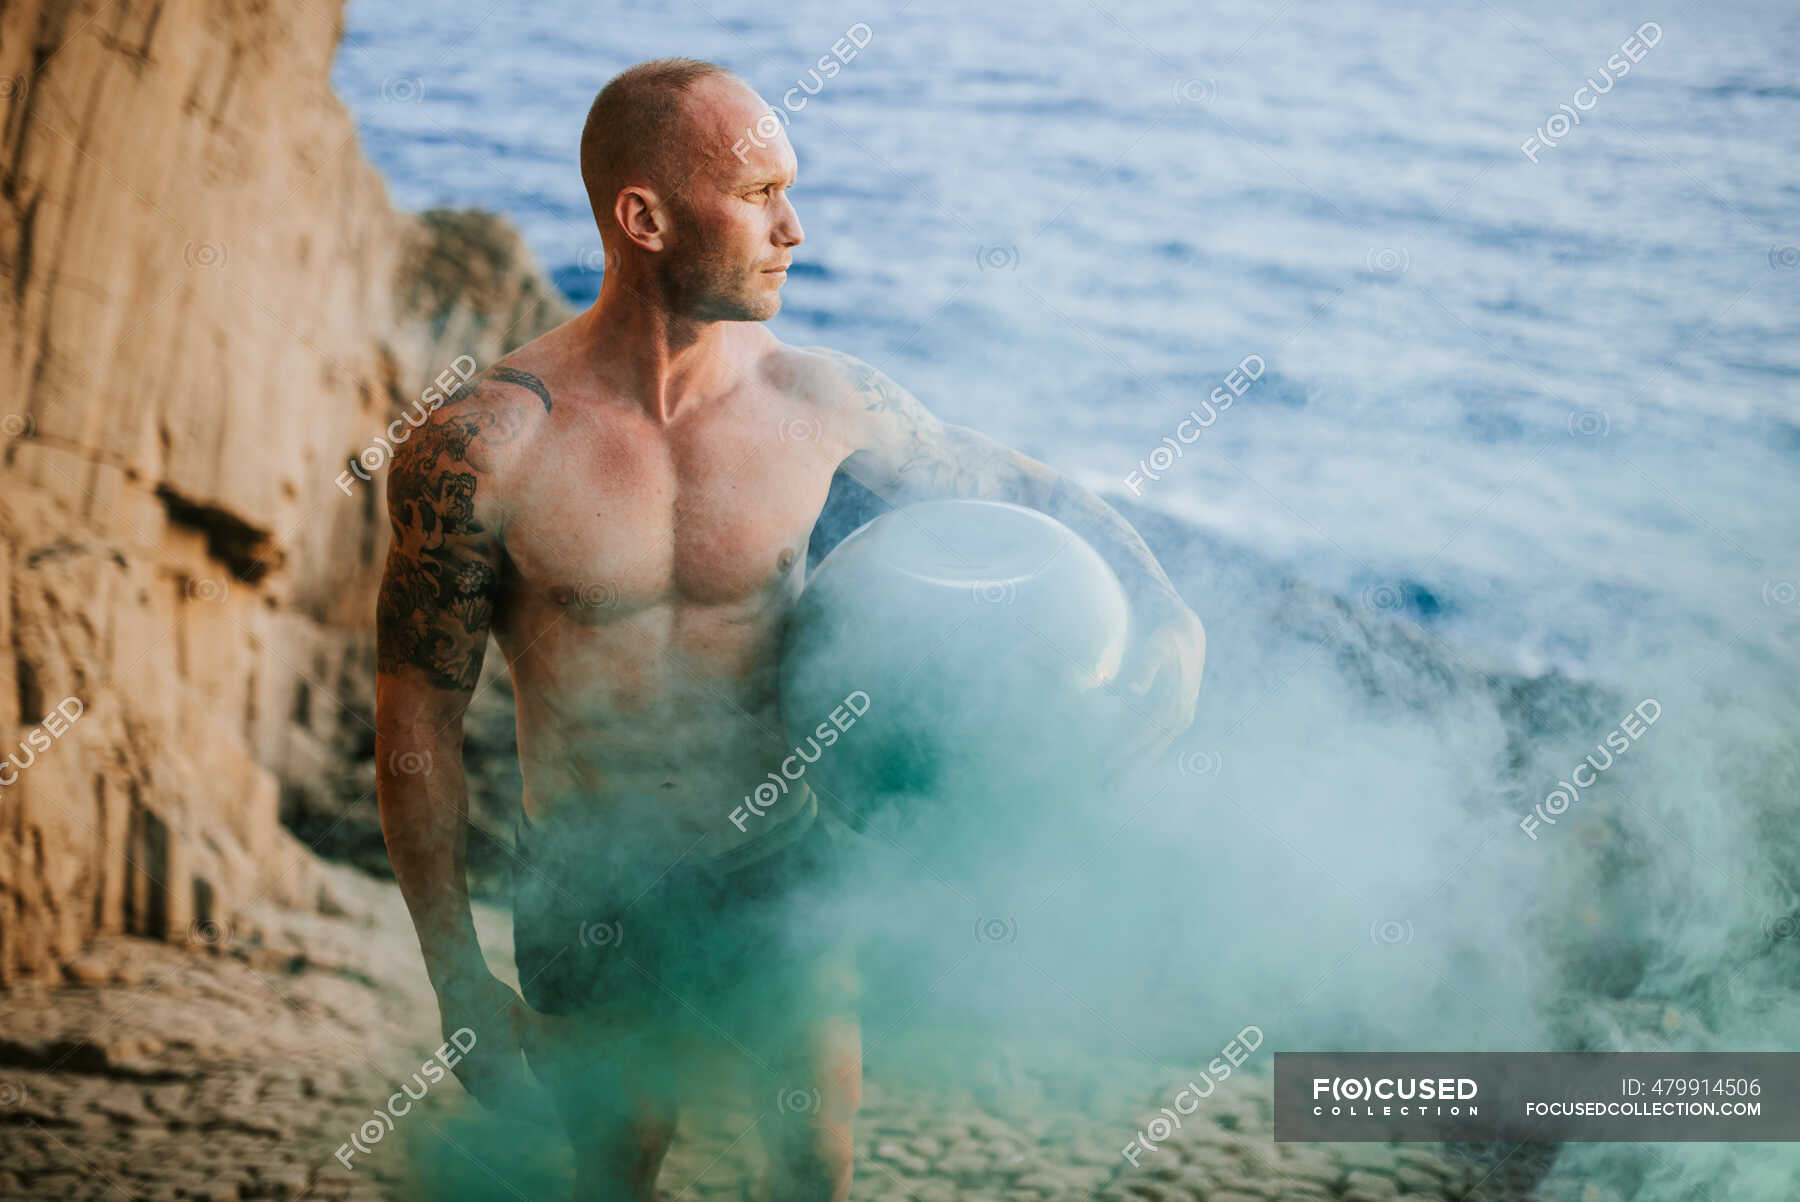 Tattooed Nudist Standing On Volcanic Rocks By The Sea Holding Fisghbowl With Colorful Smoke